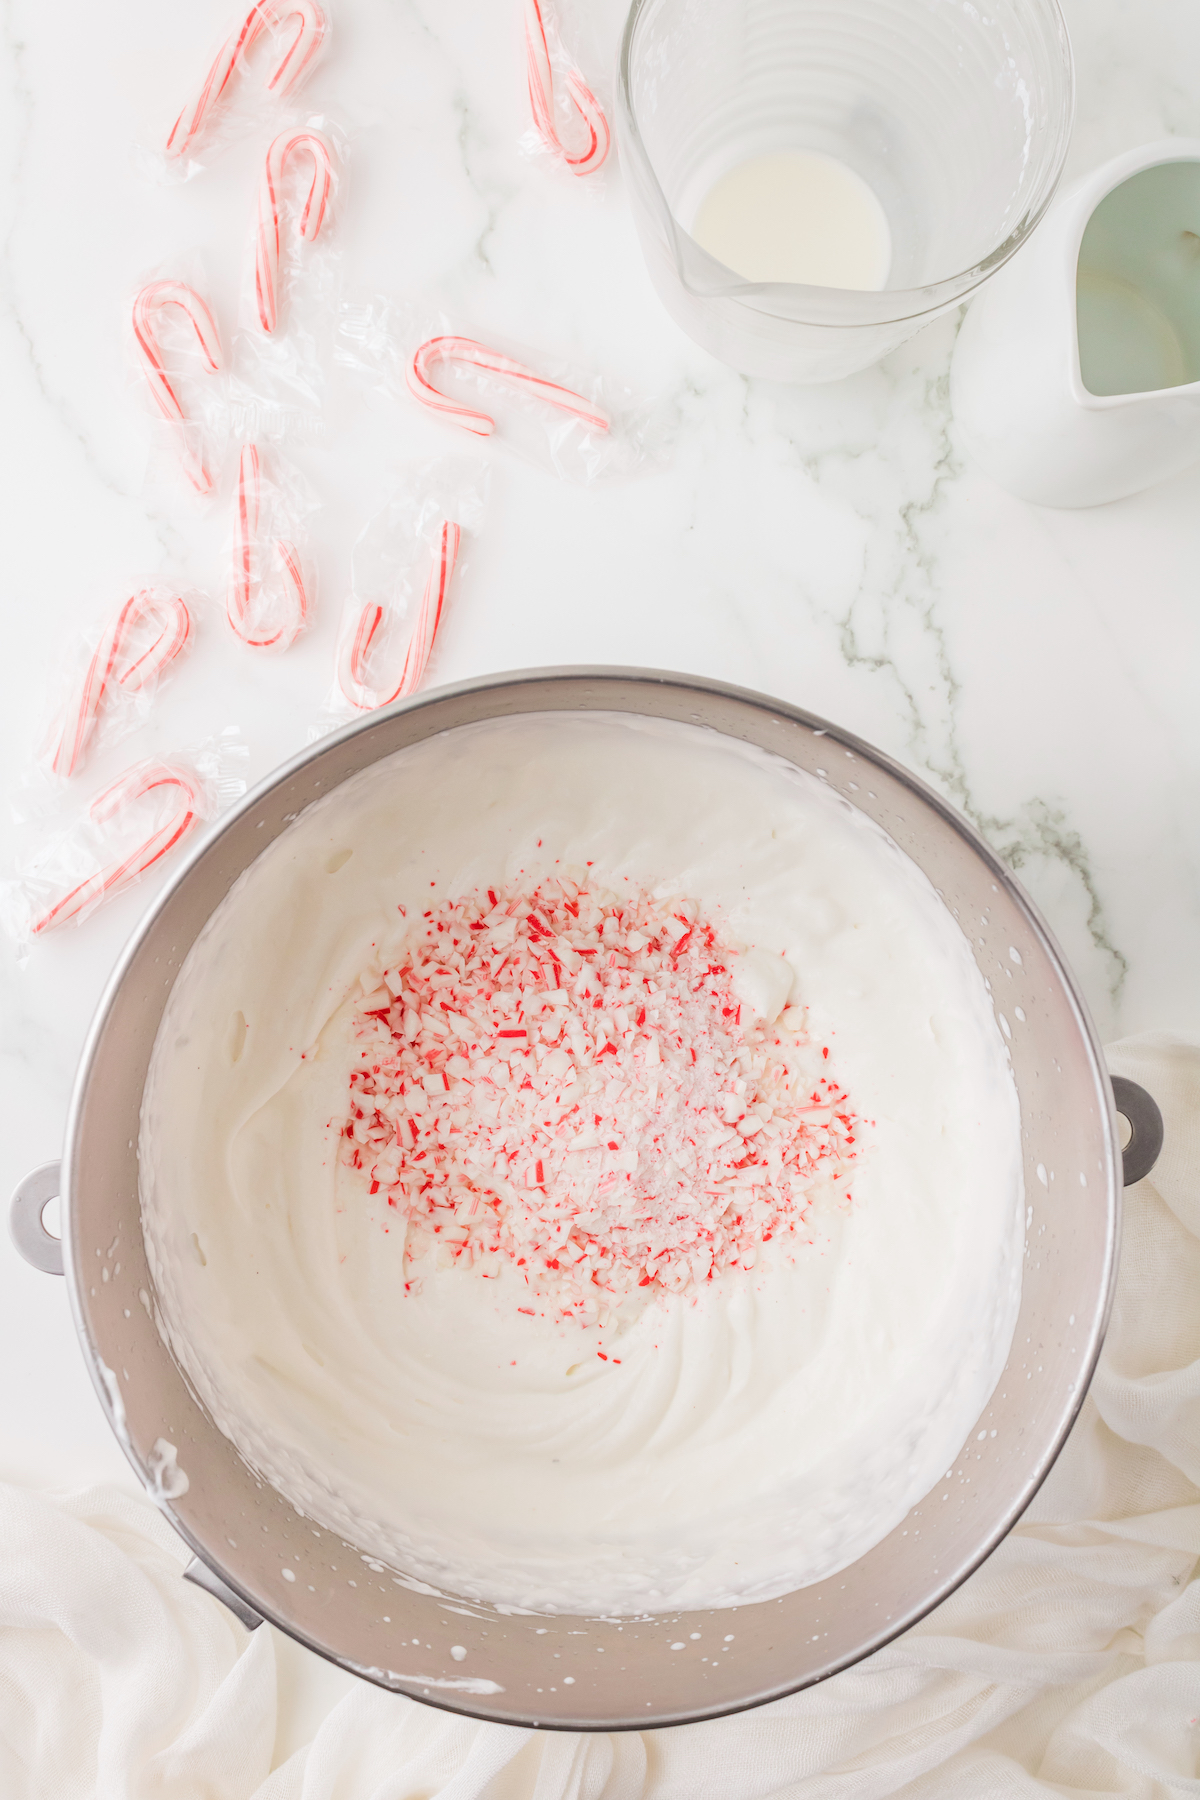 crushed candy canes added to the mixture